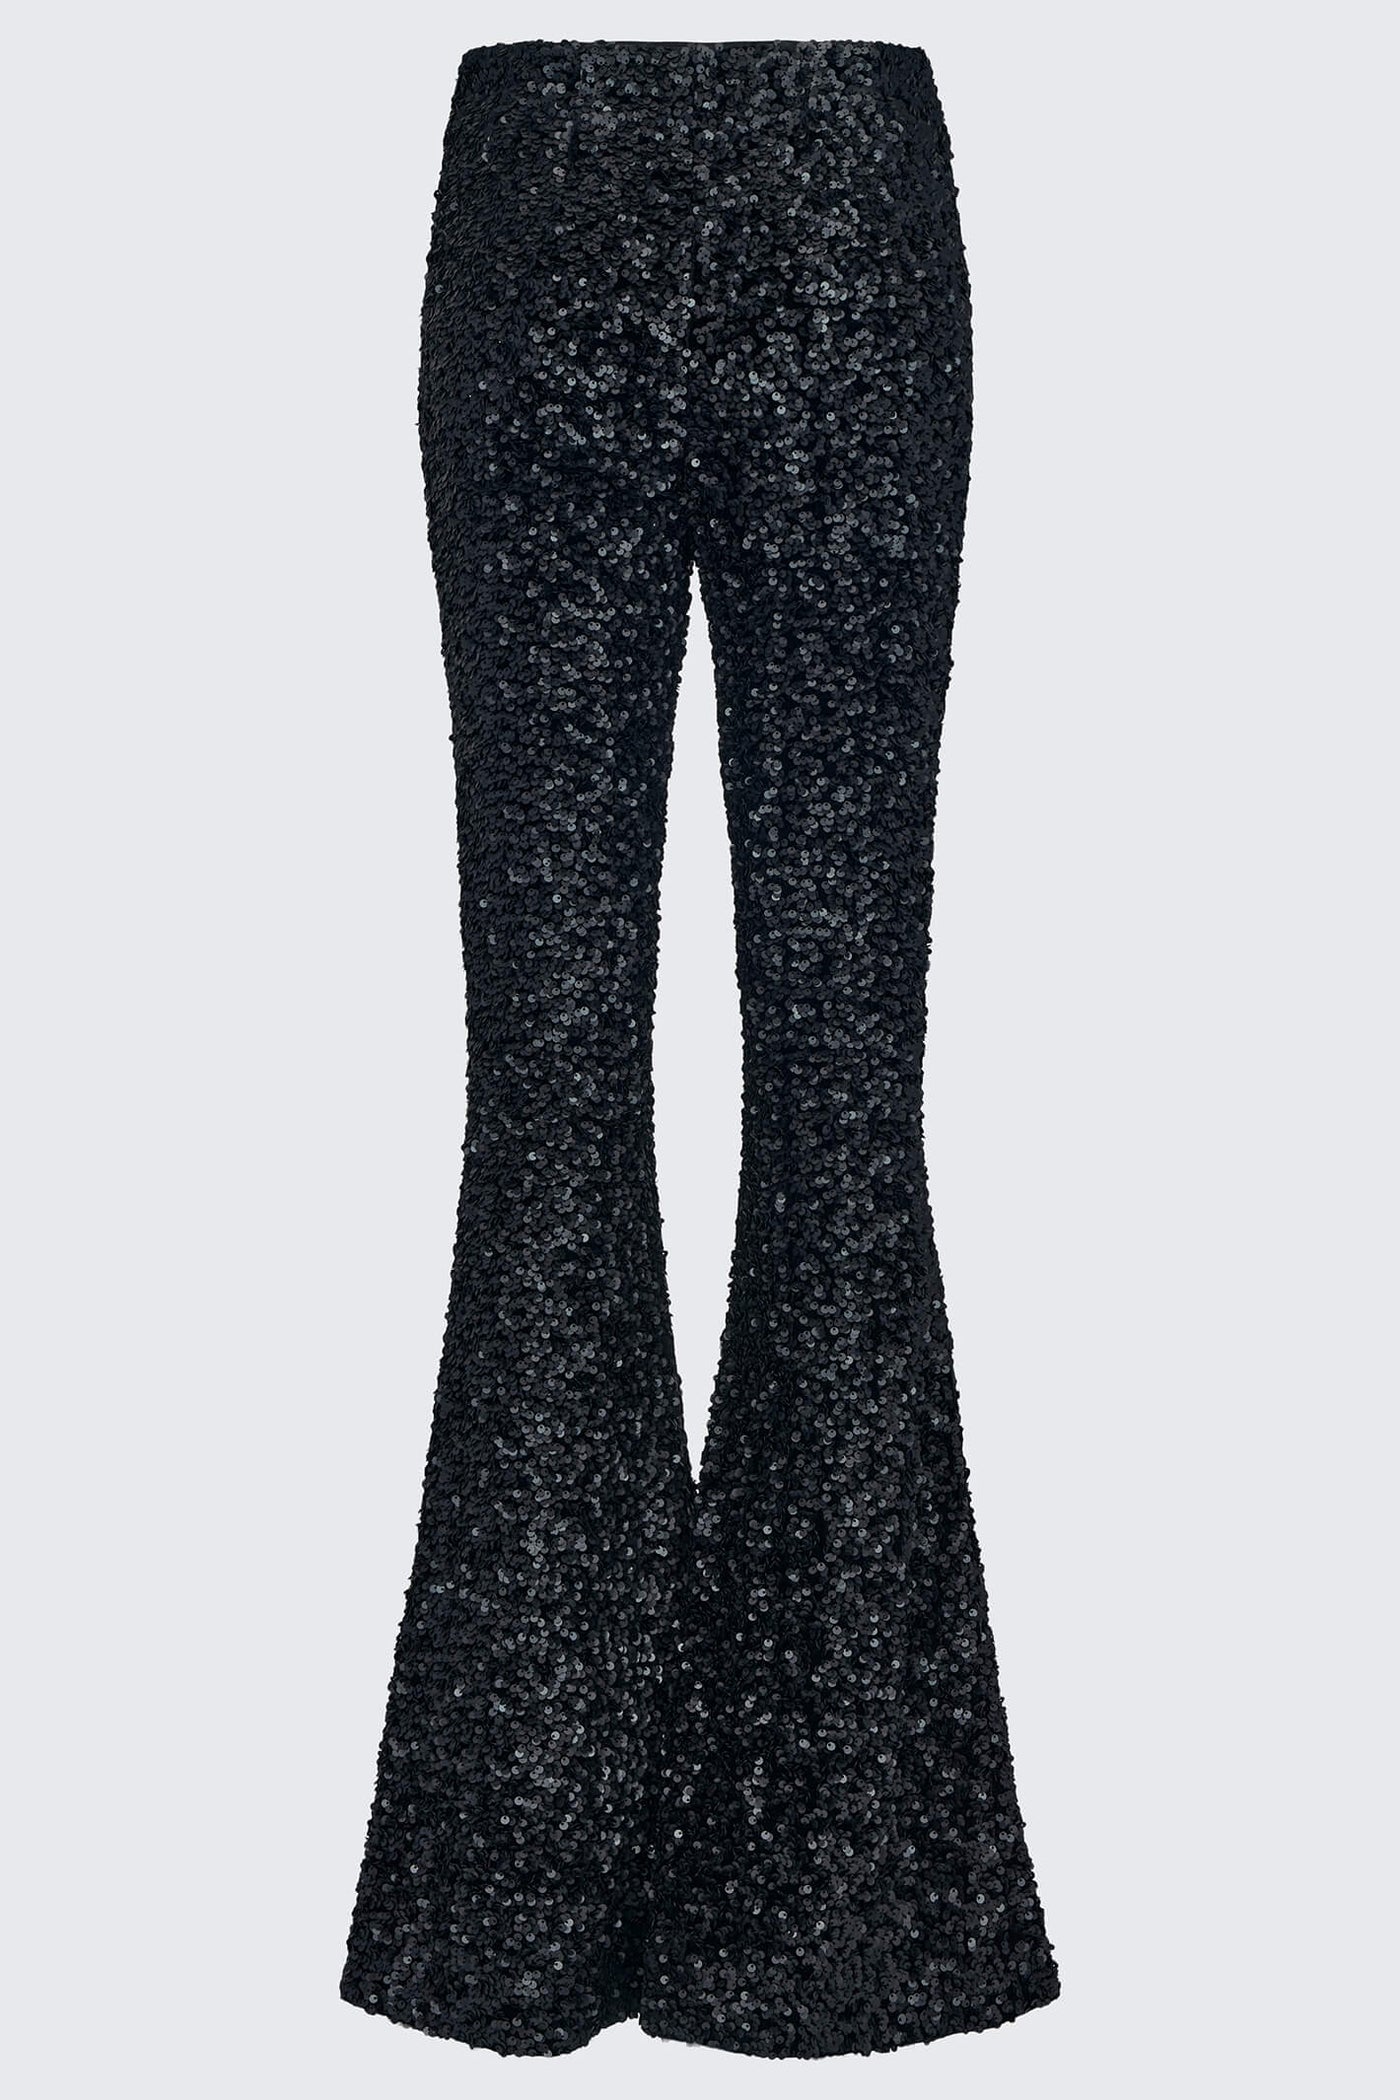 Dorothee Schumacher Shimmering Attraction 848103 Charcoal Black Trousers - Lonah Boutique